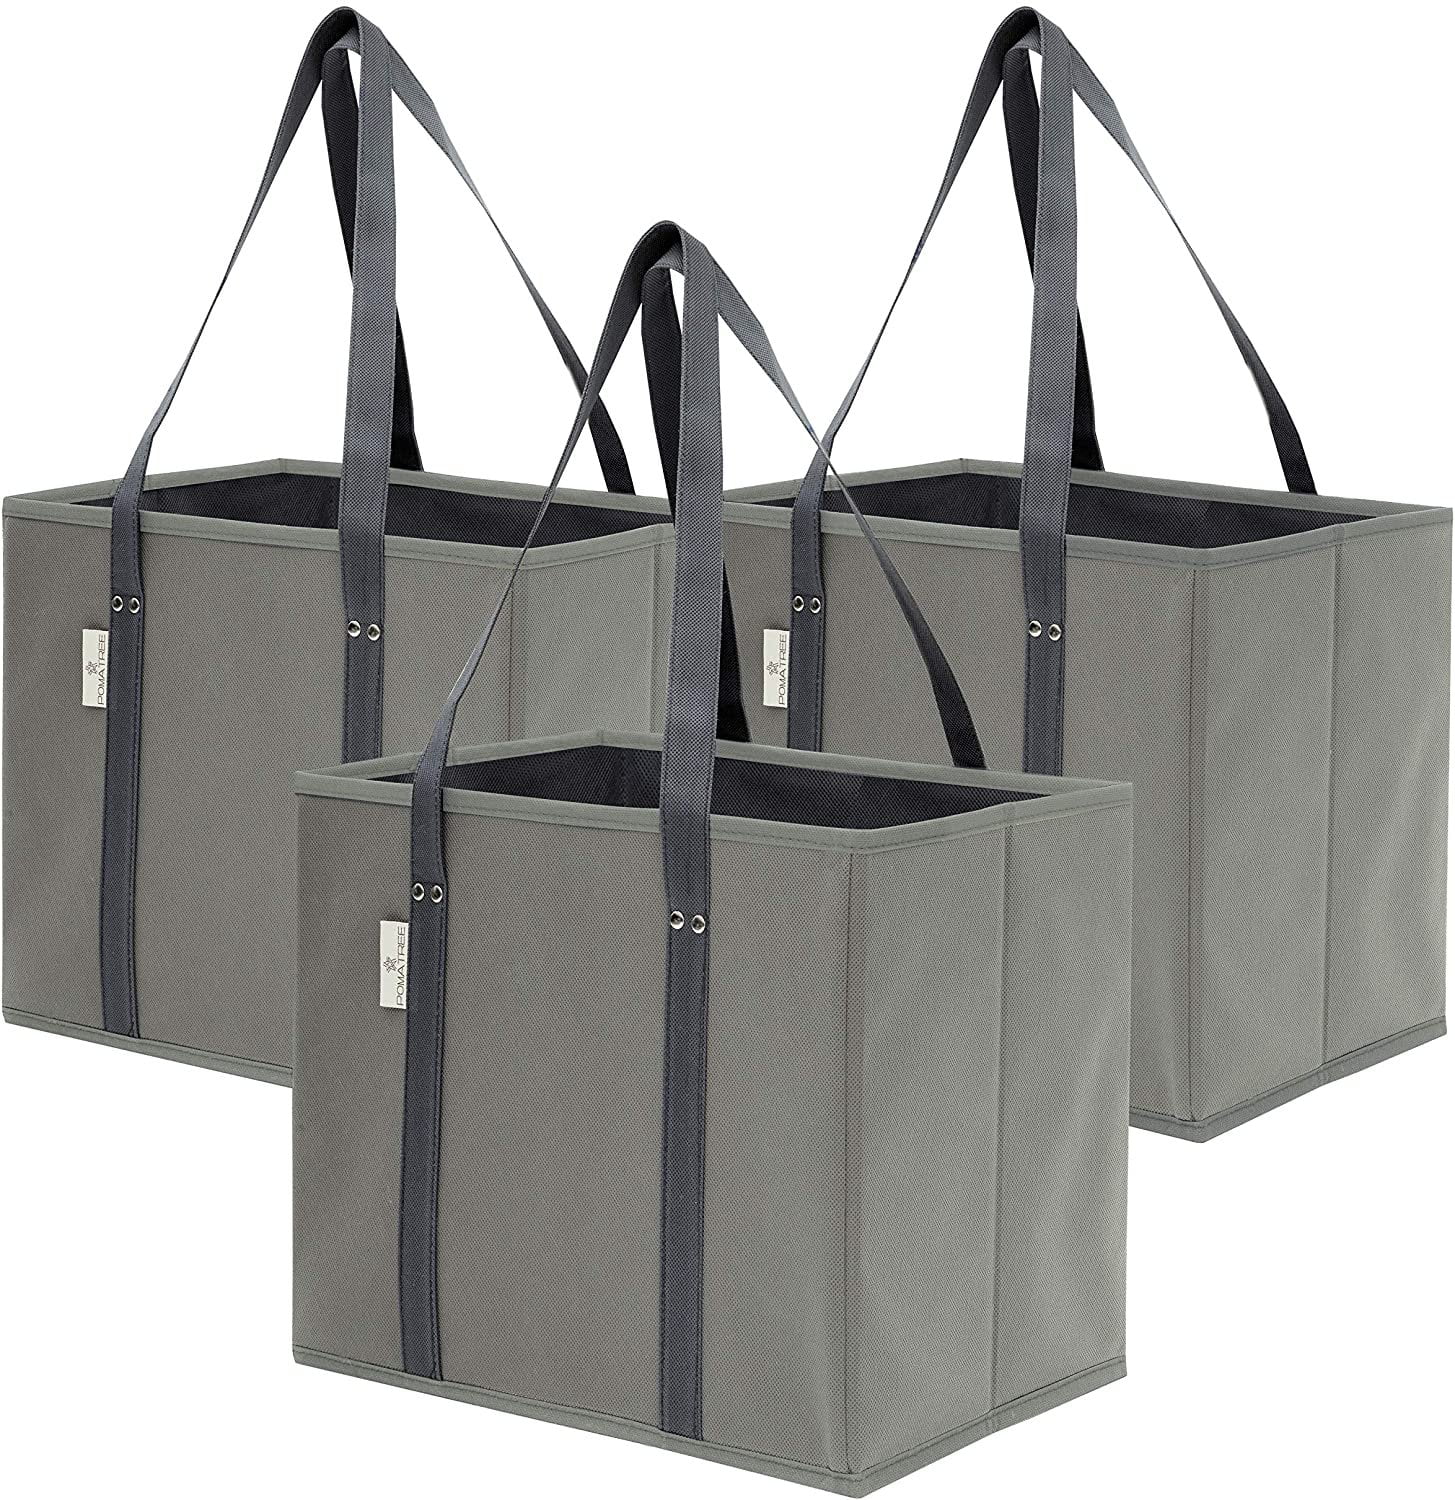 Reusable Grocery Bags100-POUNDER Extra Heavy Duty 3-PACK Grocery Bag Sack Foldable 100-lb Capacity 12.5 L X 9W X 15H Inches